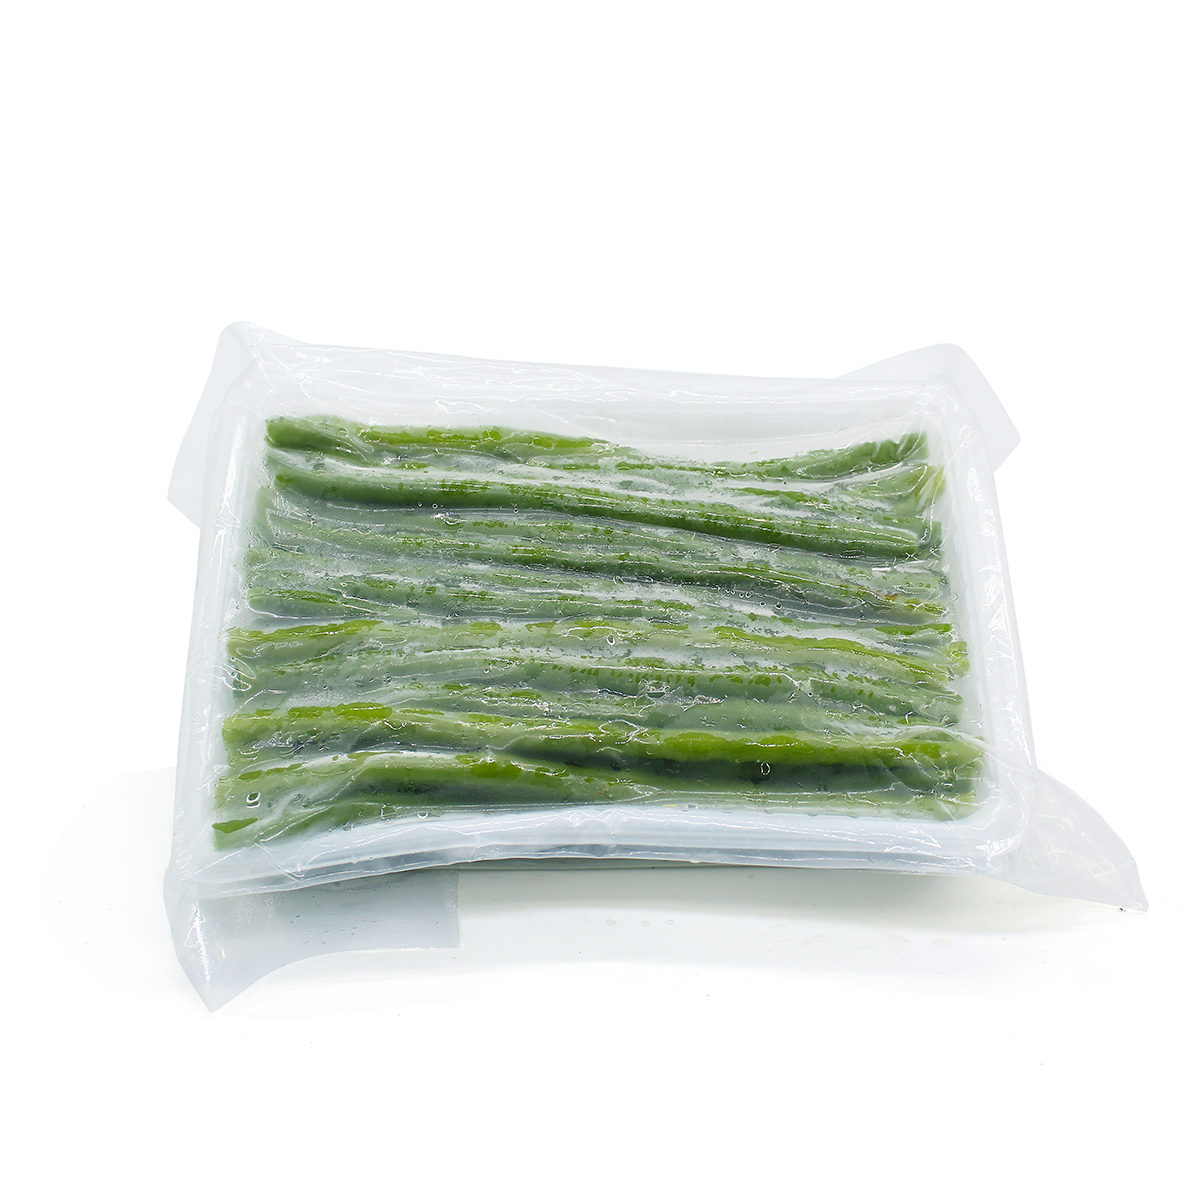 Picture of YARDLONG BEAN